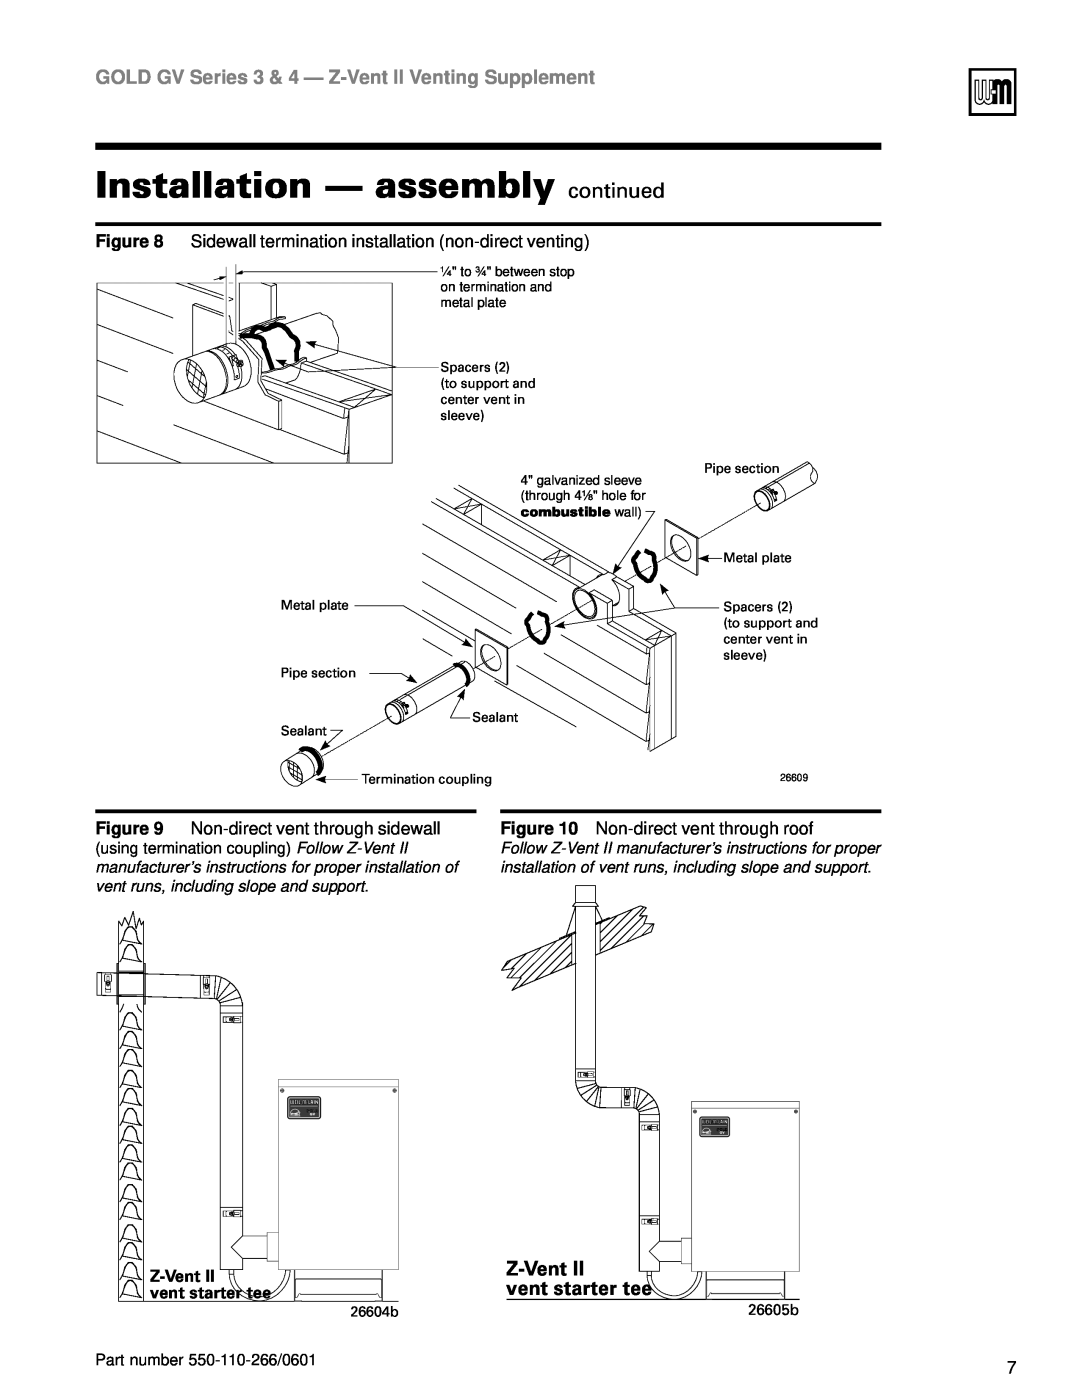 Weil-McLain GV Series 4 Installation - assembly continued, Z-VentII, vent starter tee, 26604b, 26605b, combustible wall 